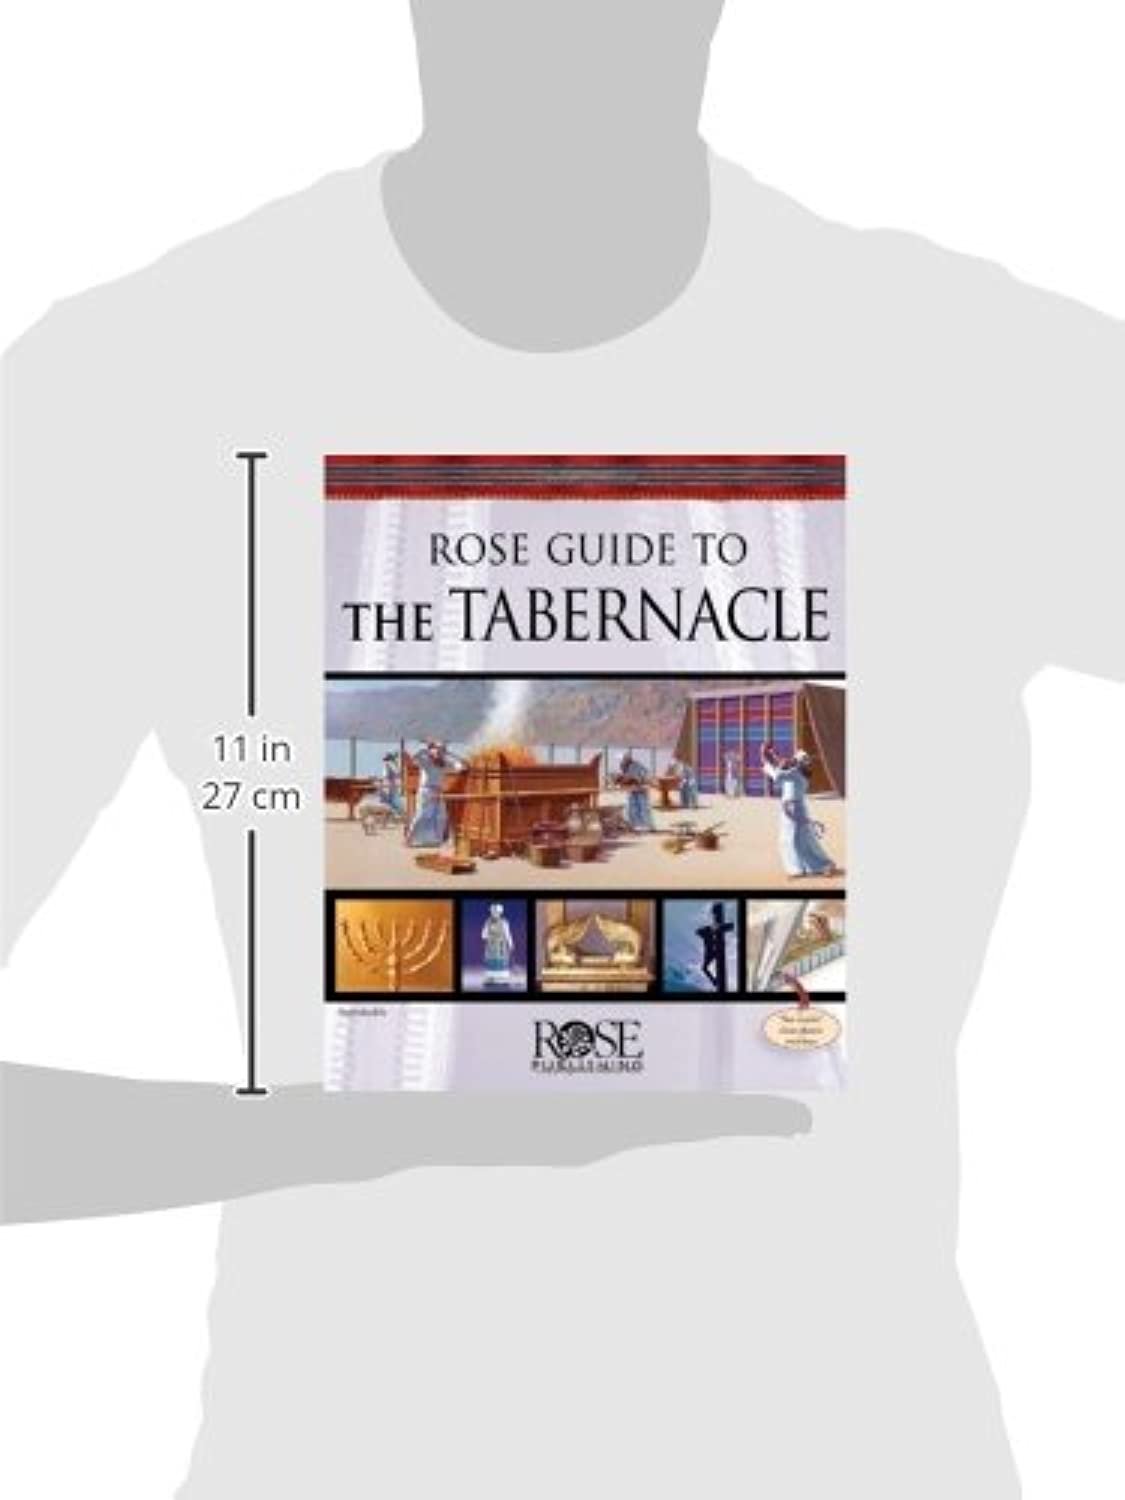 Rose Guide to the Tabernacle (Hardcover) - image 4 of 4